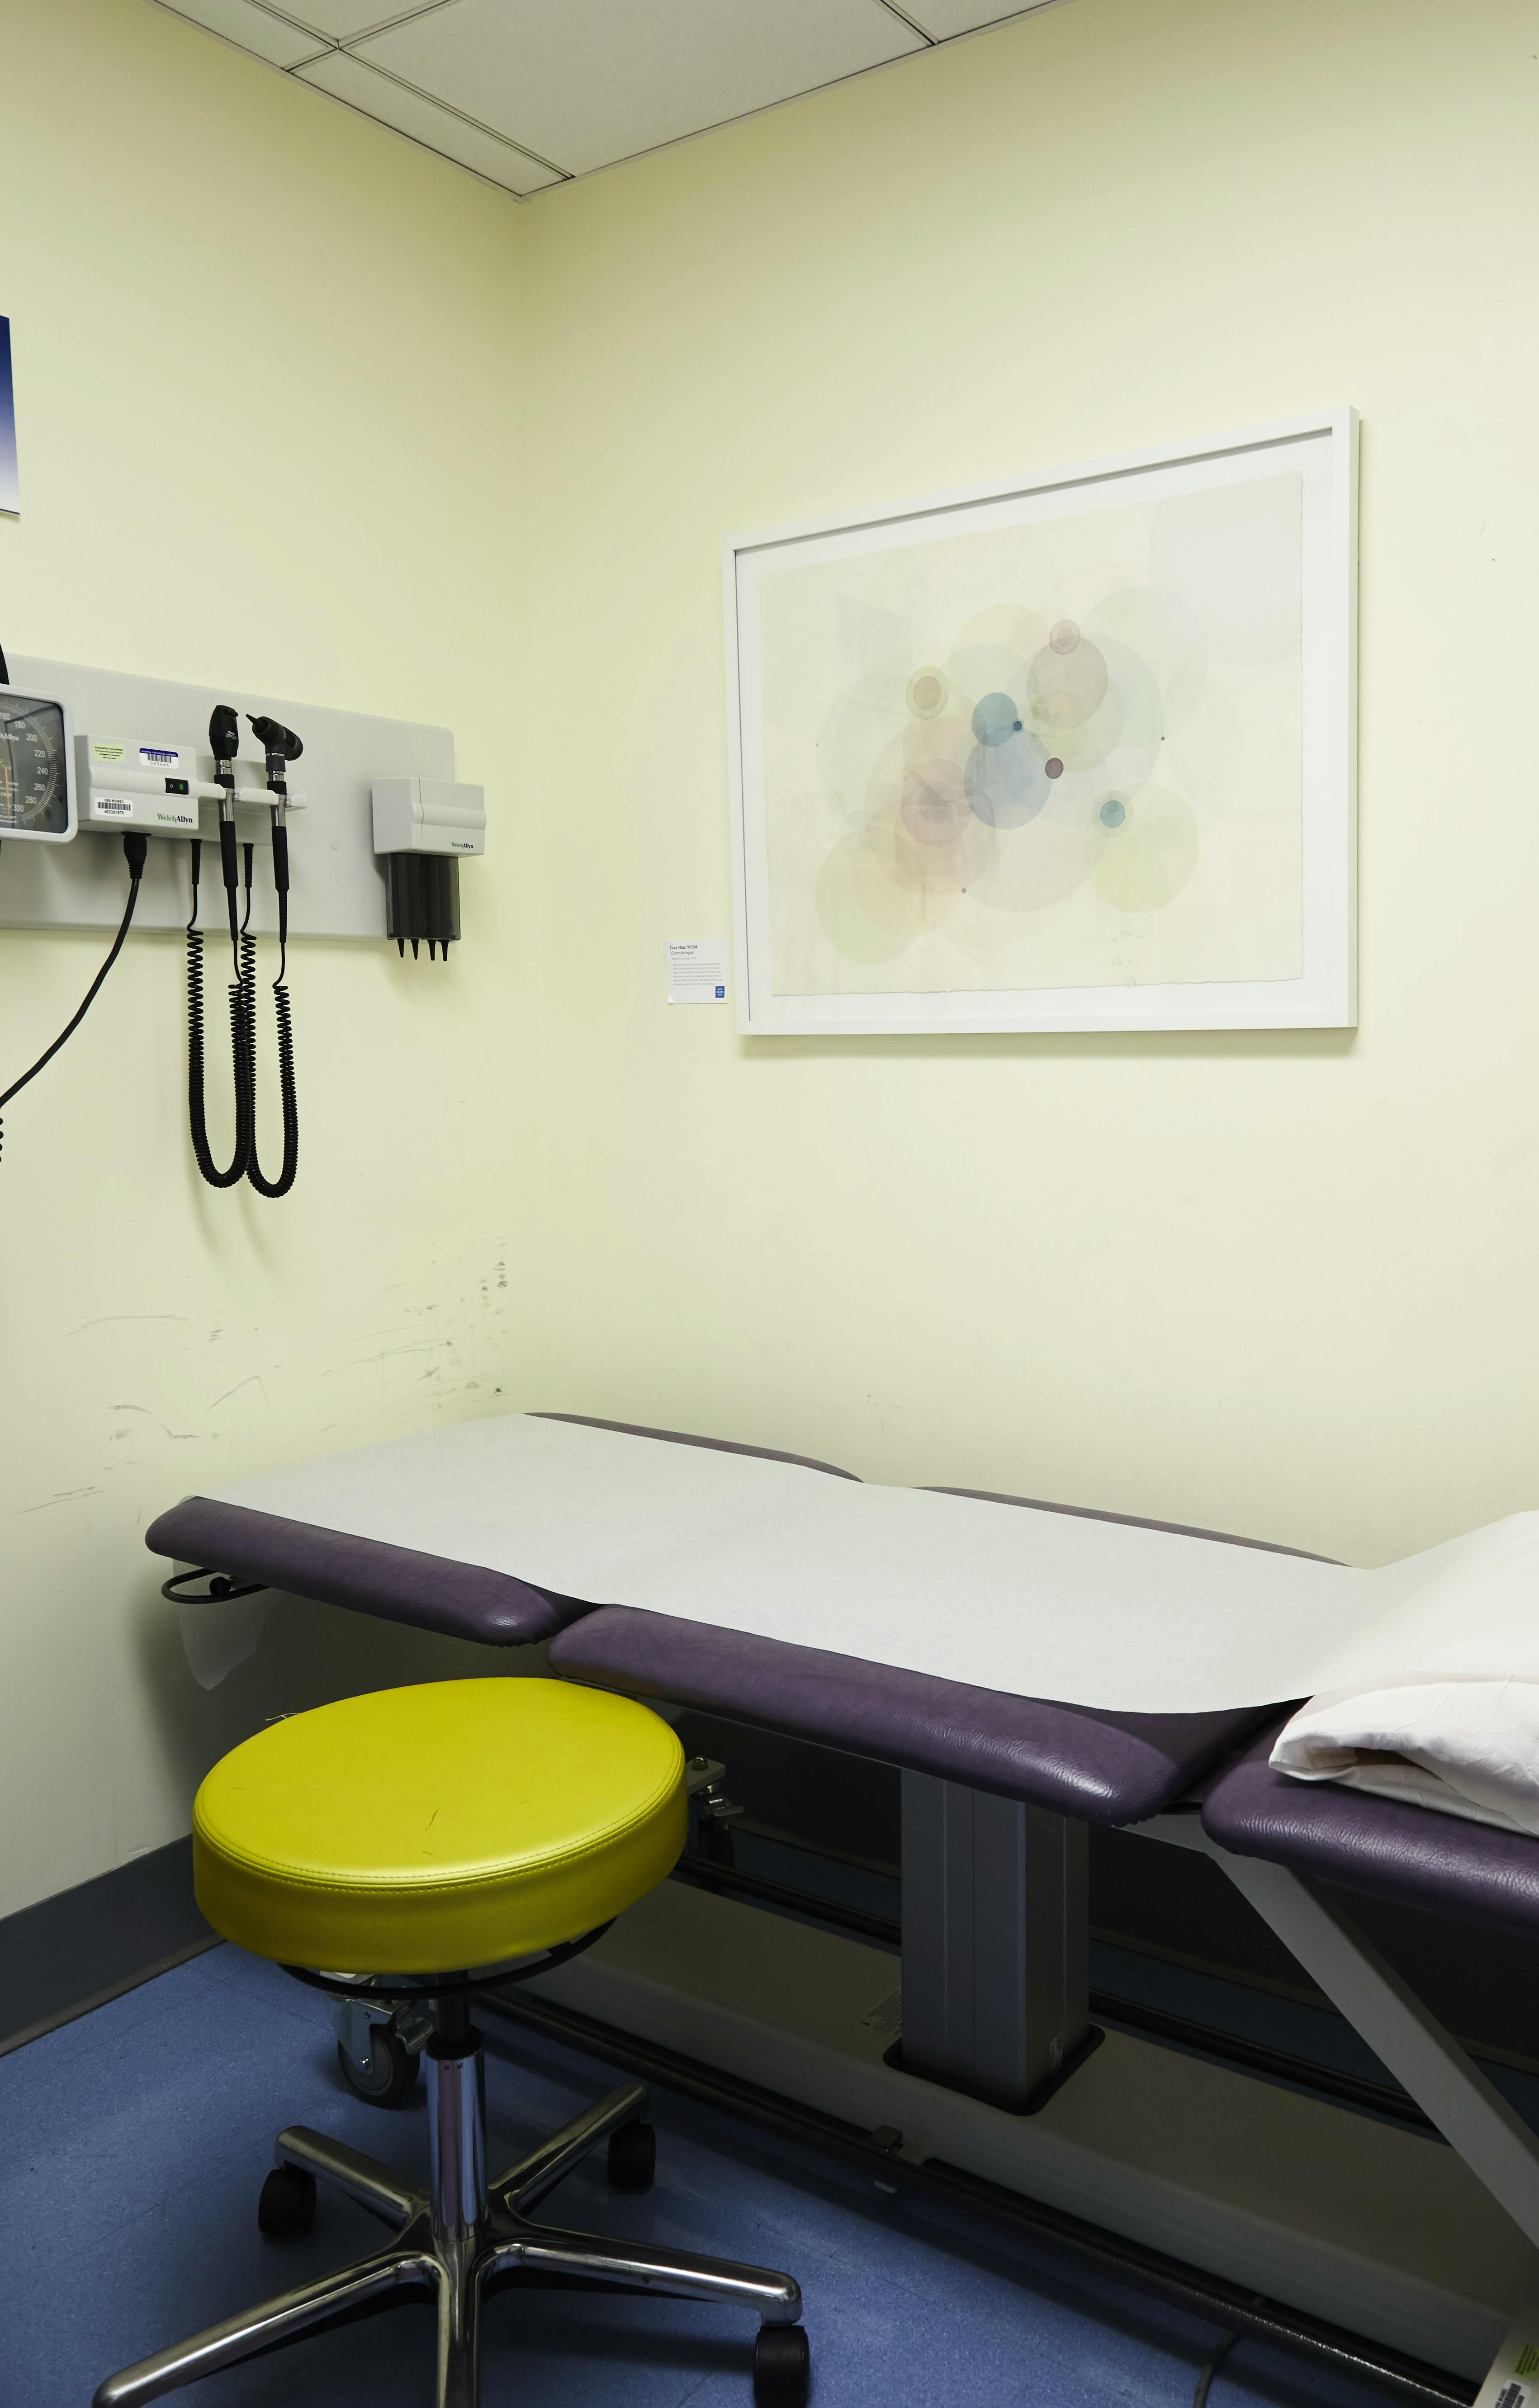 Framed artwork with layered, concentric circles by artist Evan Venegas installed on a beige wall above a purple exam table.